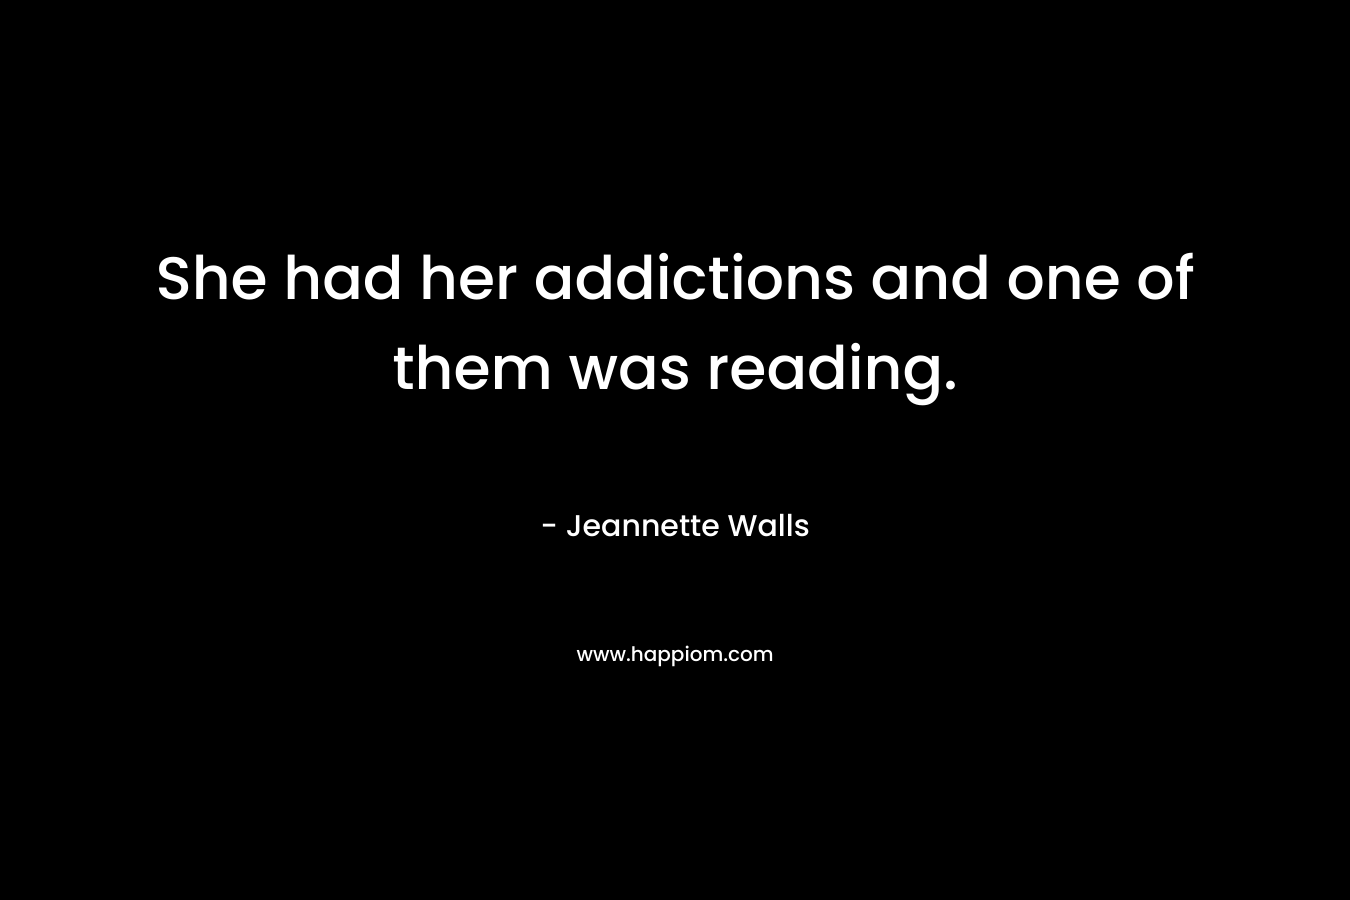 She had her addictions and one of them was reading.